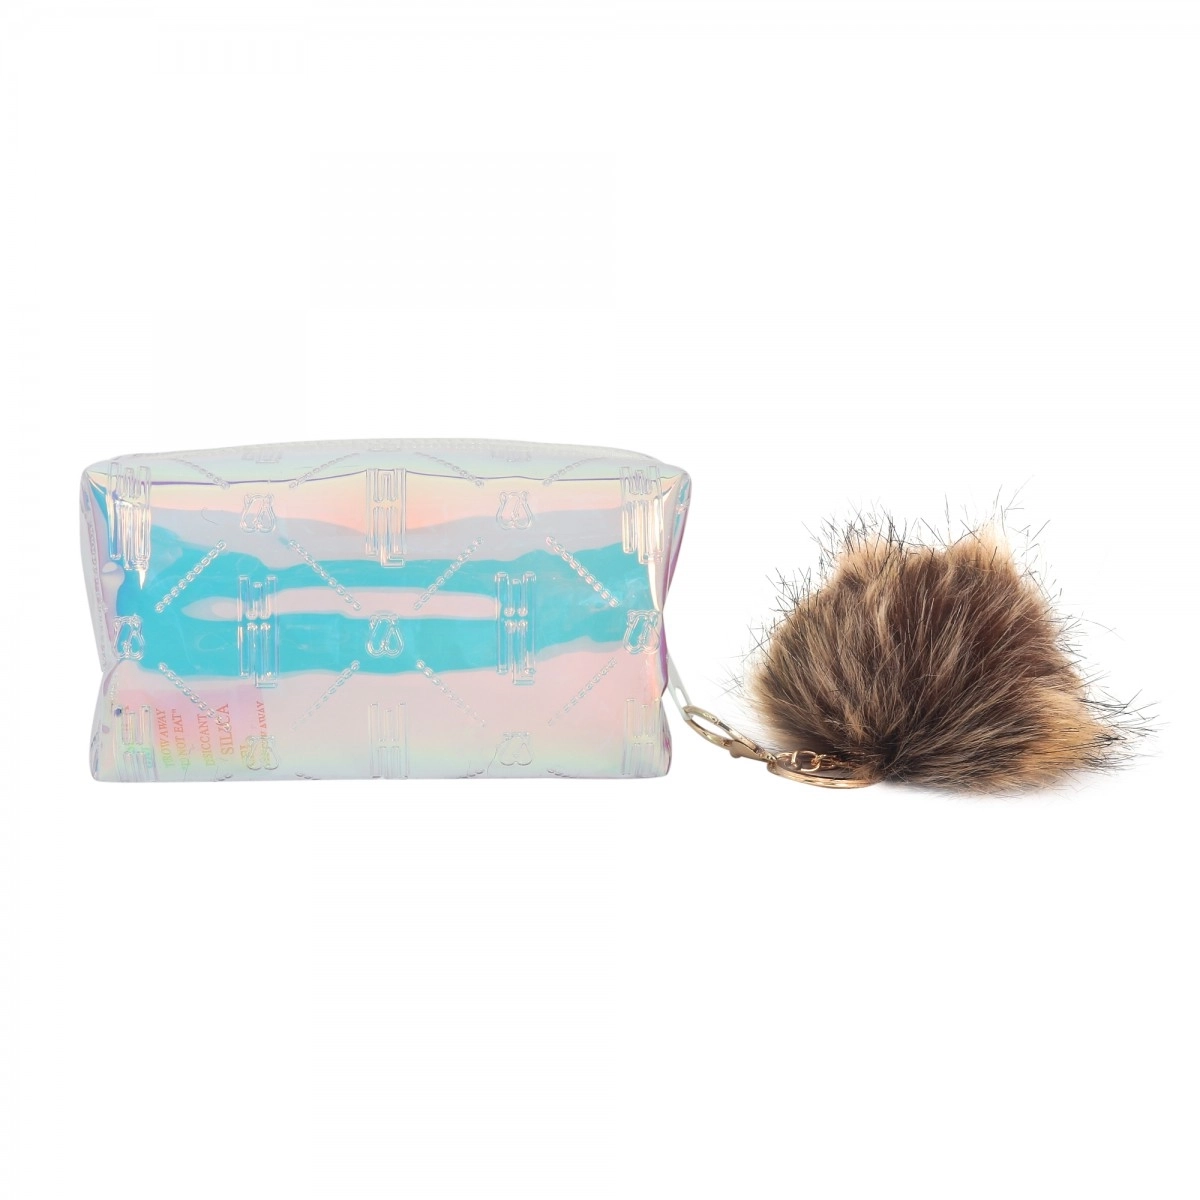 Hamster London Raver Pouch White 9Y+